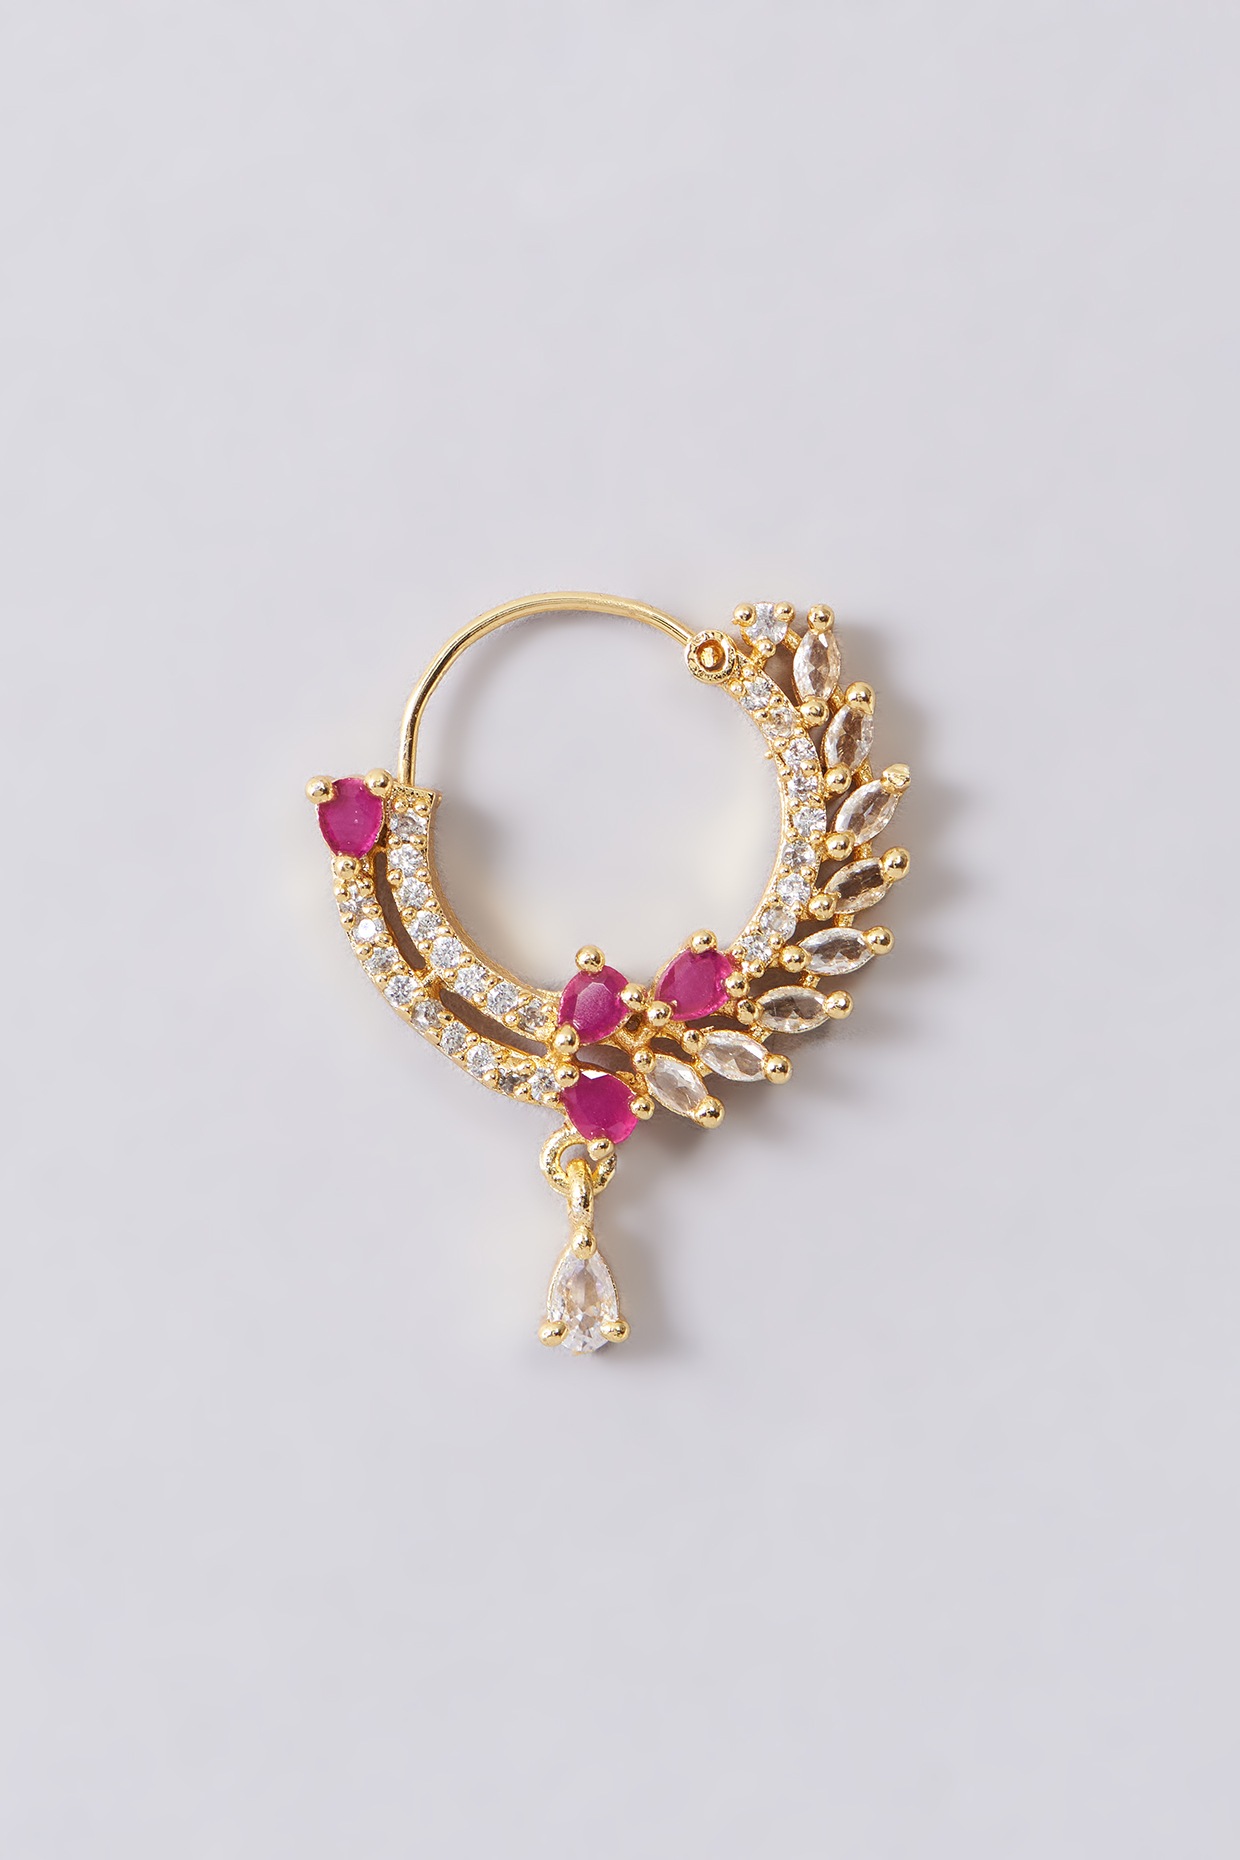 Buy South Indian Nose Rings & Pins Online | Premium Quality | Free Shipping